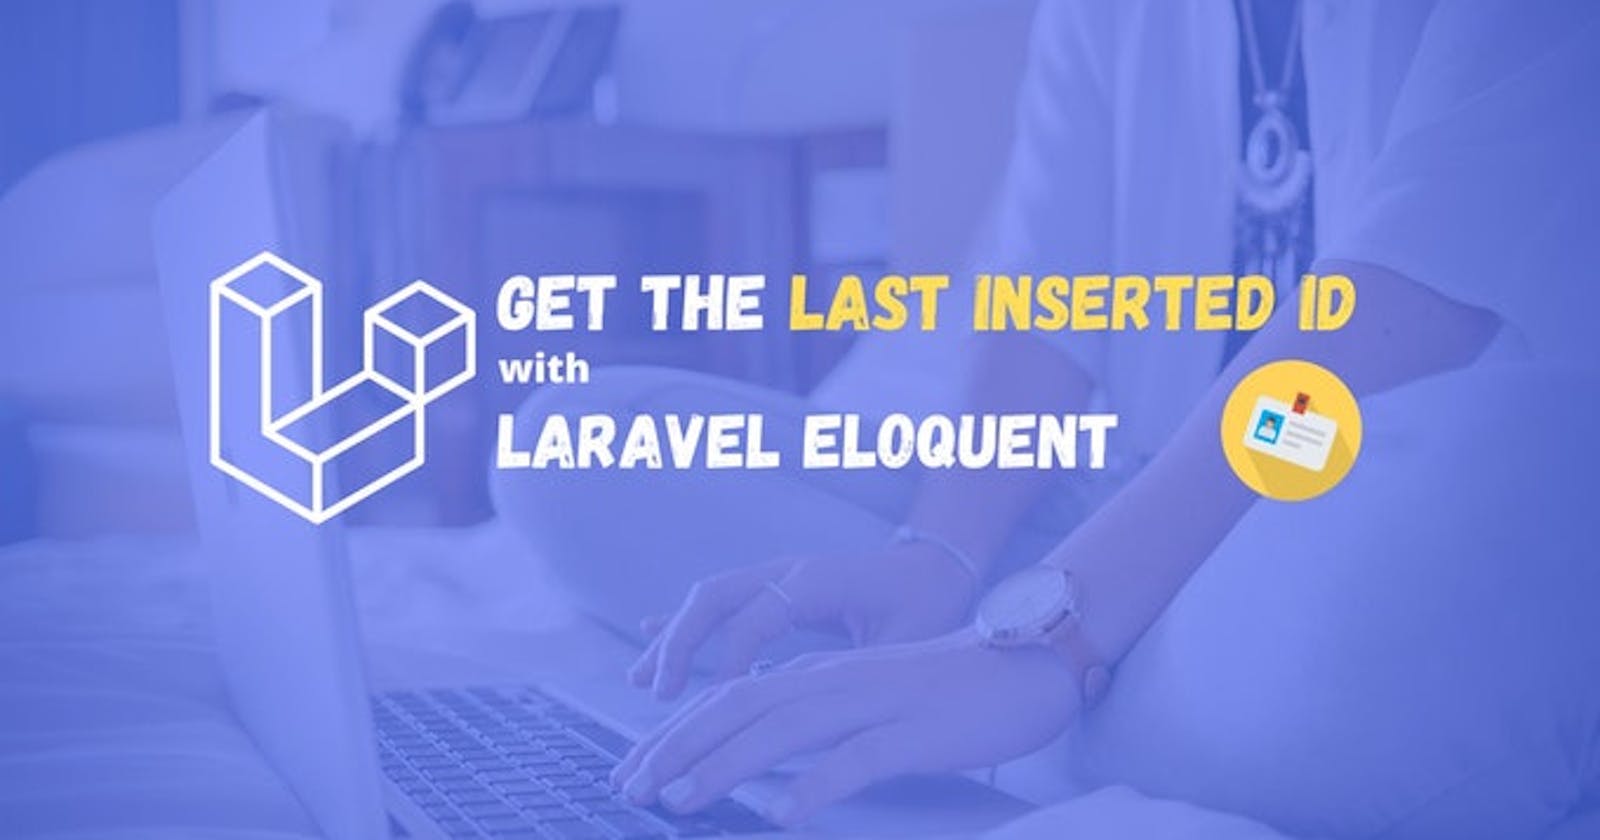 How to Get the Last Inserted Id Using Laravel Eloquent?